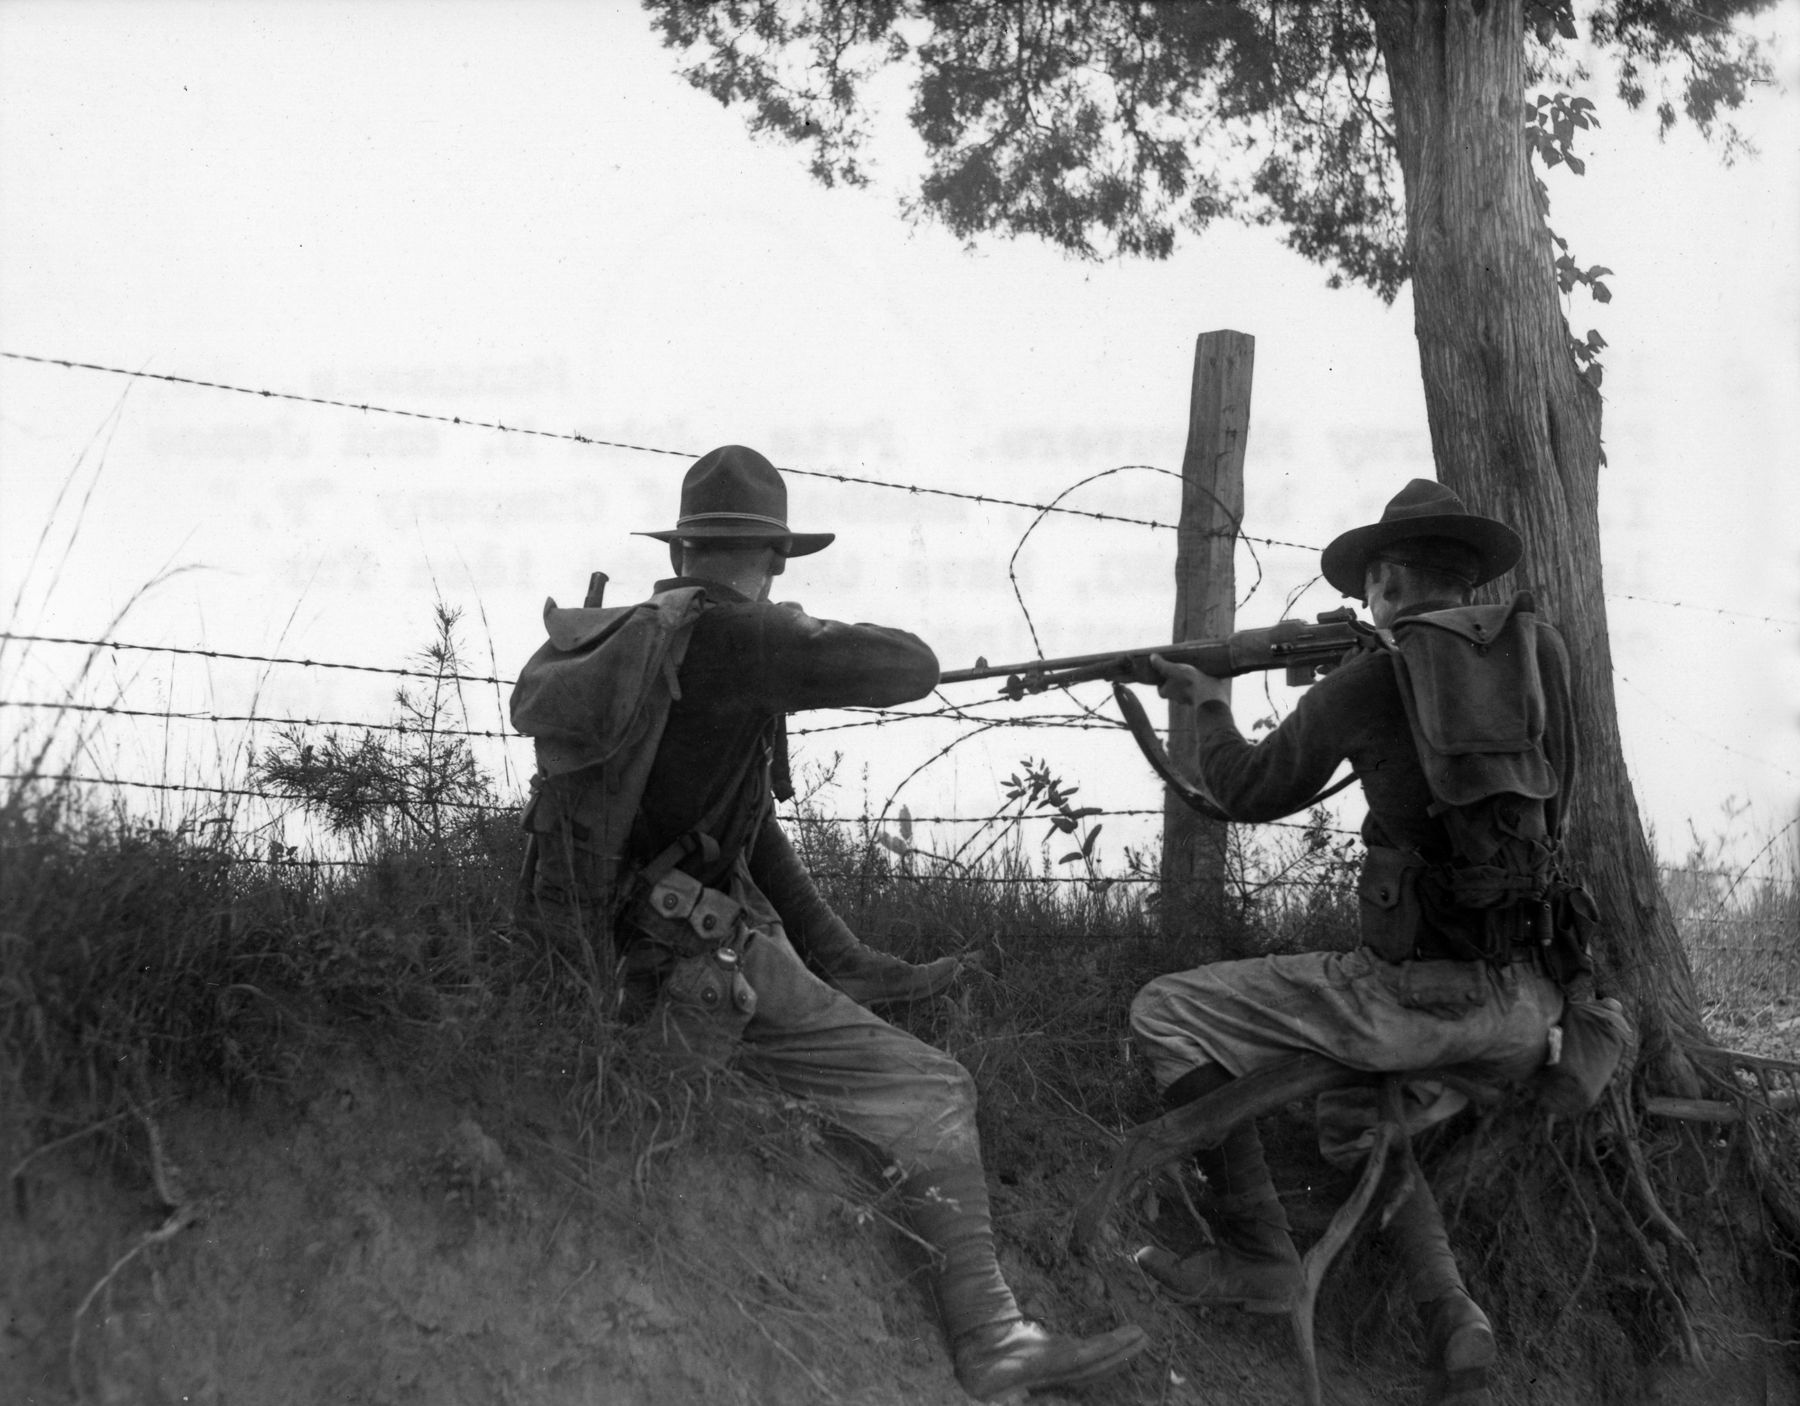 BELOW: A pair of National Guard soldiers fires their weapons during maneuvers in Manassas, Virginia. The soldier on the right fires a Browning Automatic Rifle (BAR).